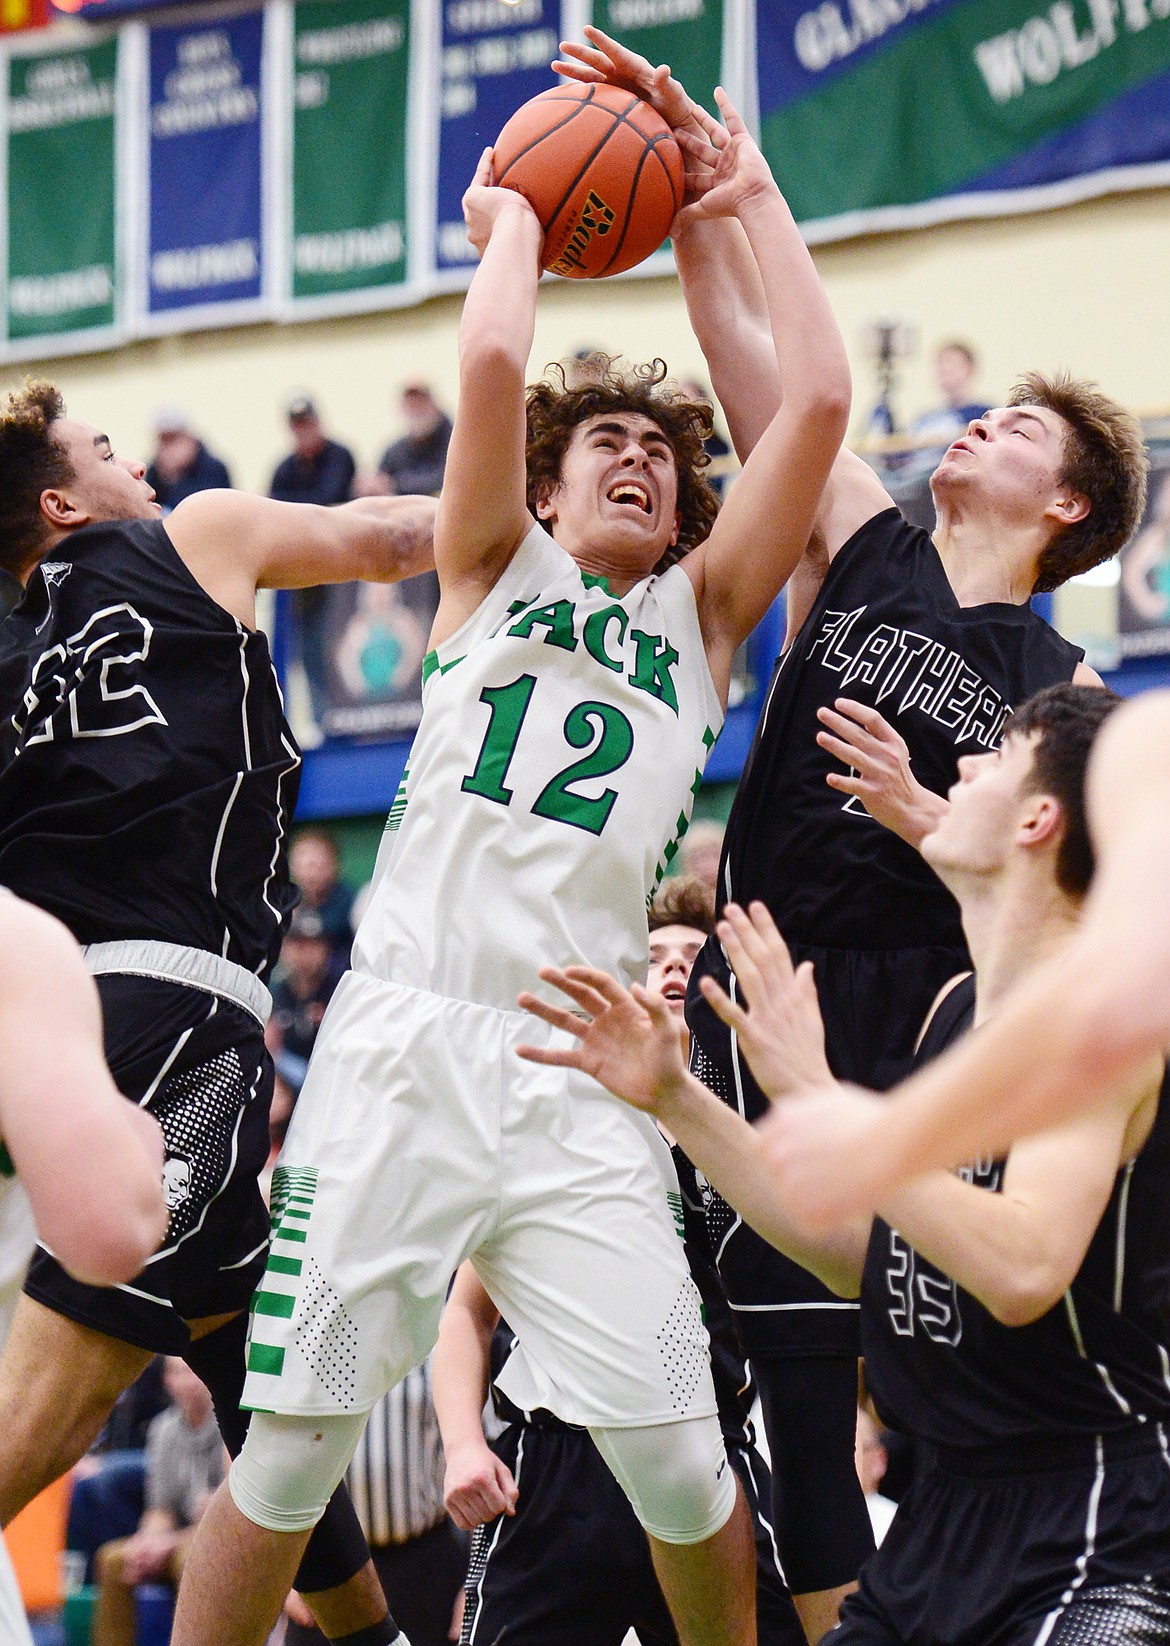 Glacier's Weston Price (12) powers to the rim between Flathead's Anthony Jones (42) and Tannen Beyl (5) during a crosstown matchup at Glacier High School on Friday. Beyl was whistled for a foul on the play. (Casey Kreider/Daily Inter Lake)